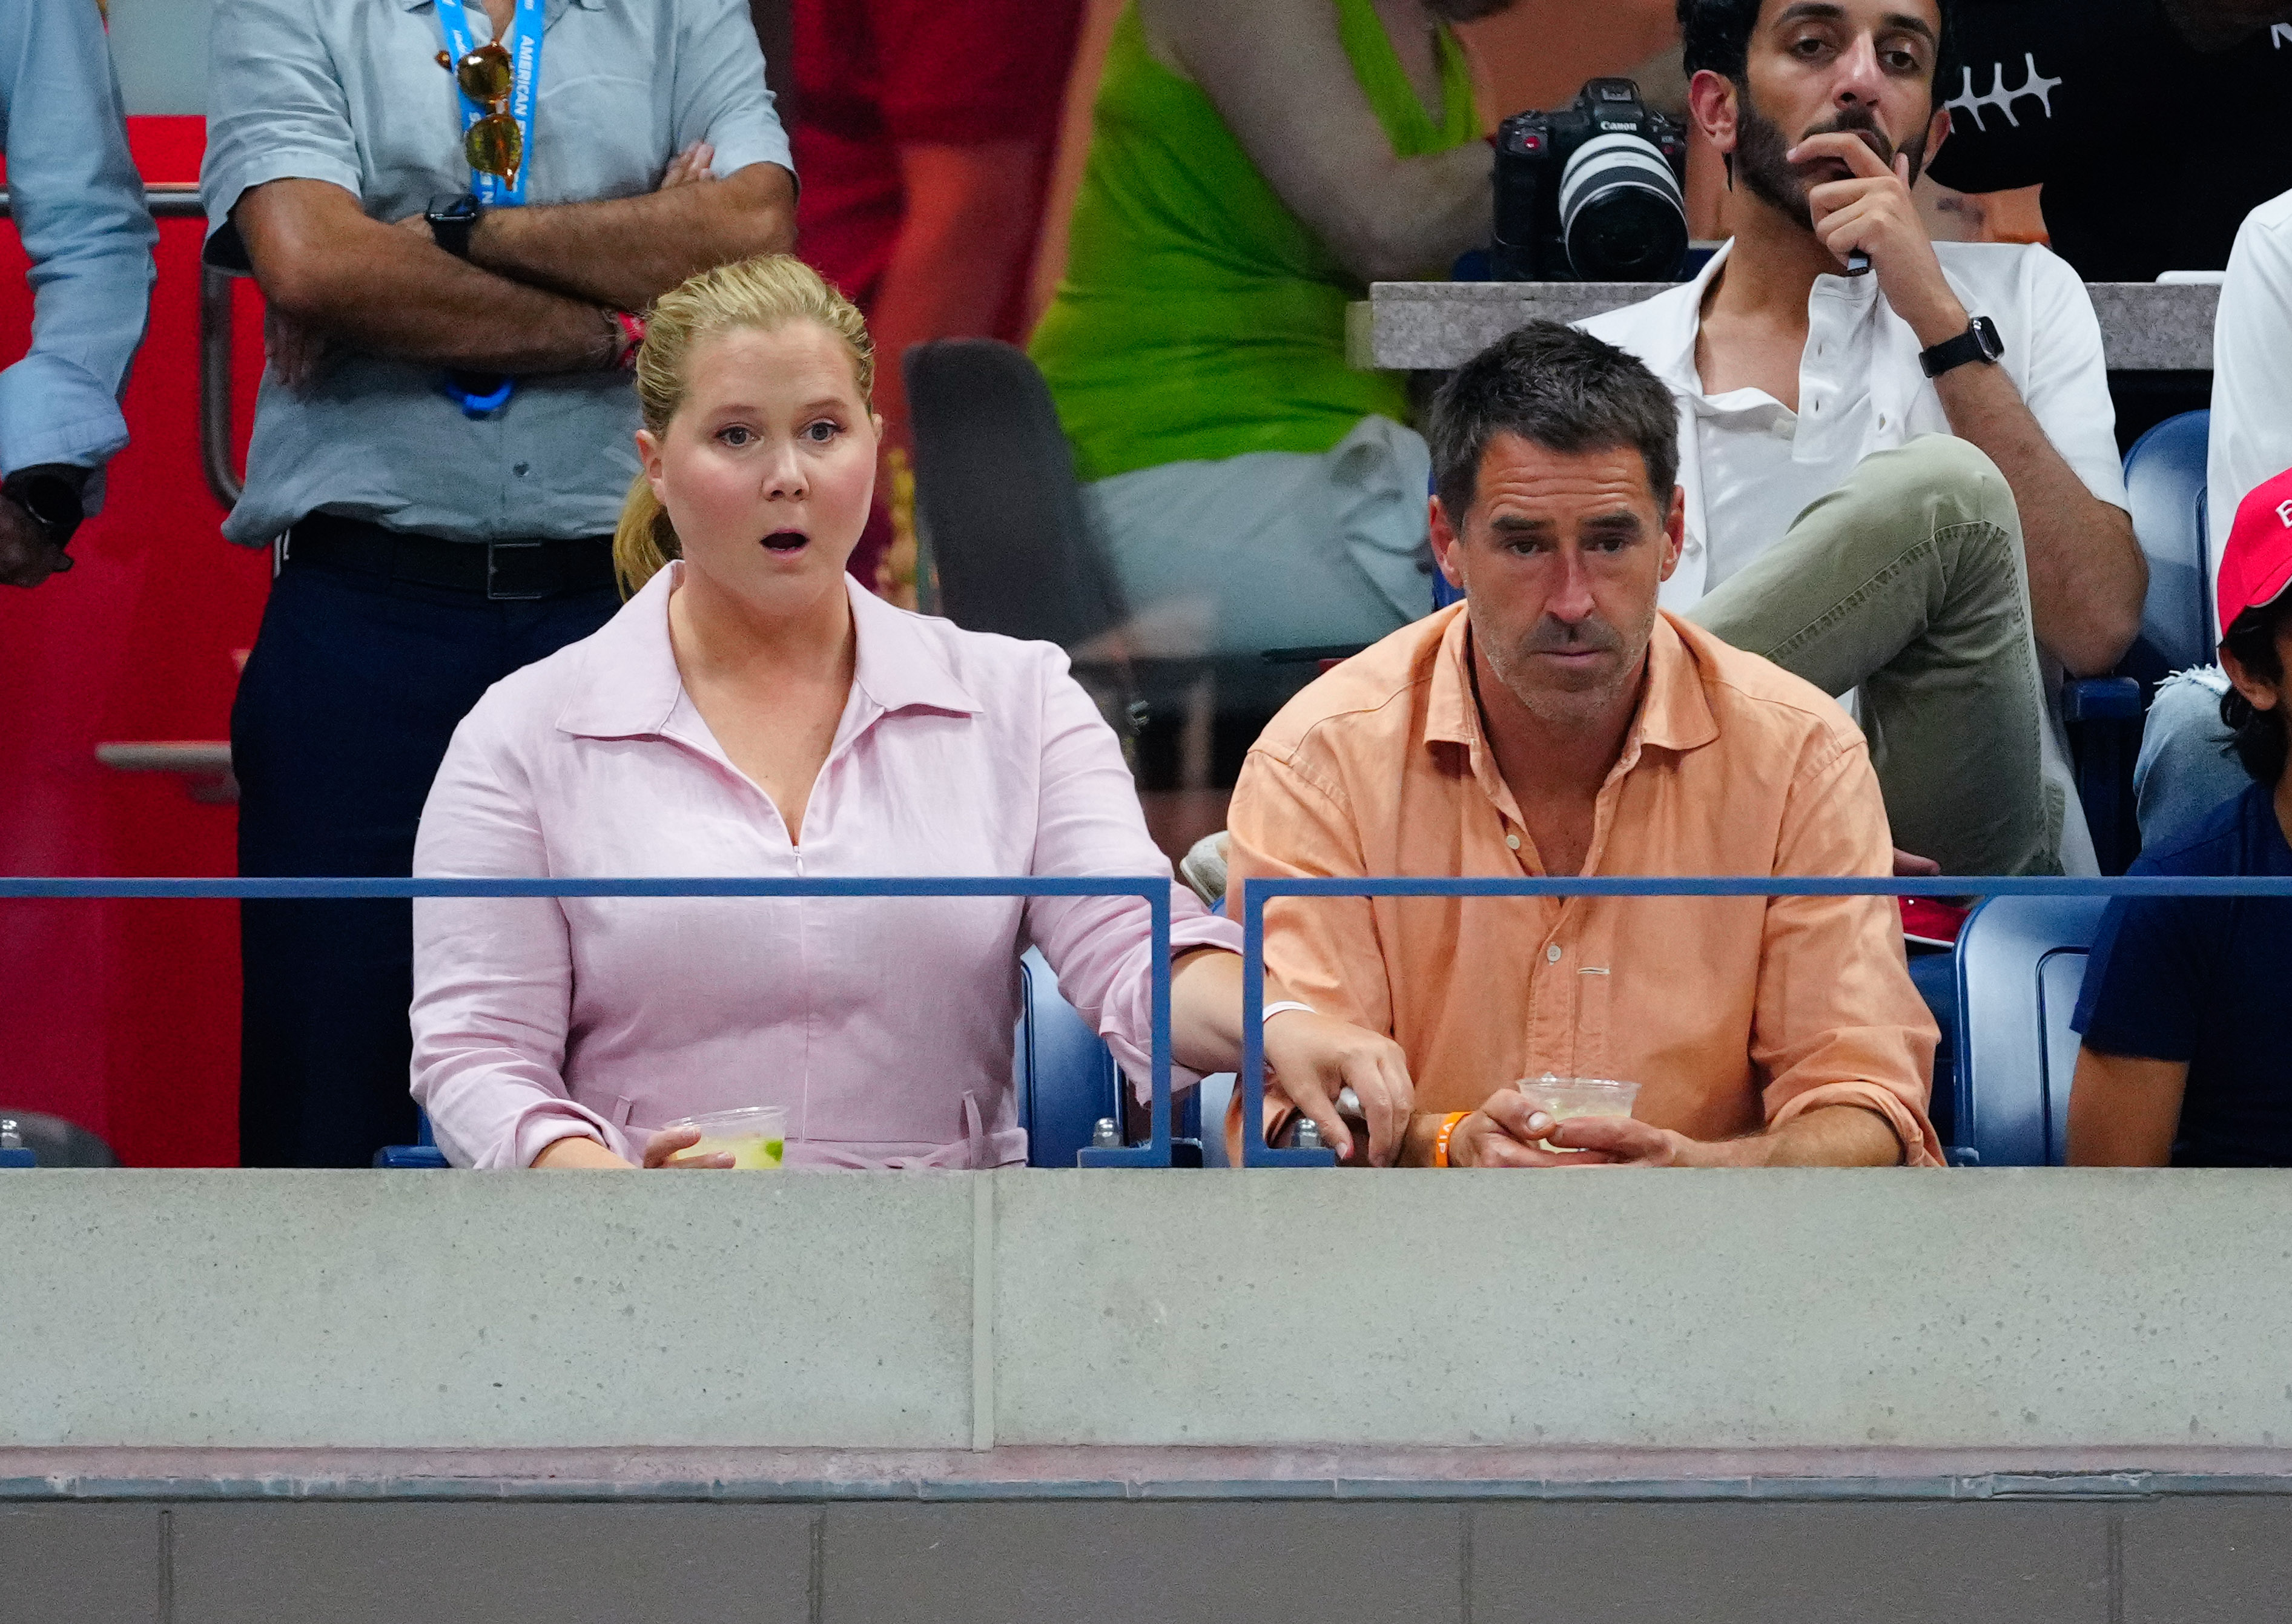 Amy Schumer and Chris Fischer are seen at the 2023 US Open Tennis Championships on September 8, 2023, in New York City. | Source: Getty Images